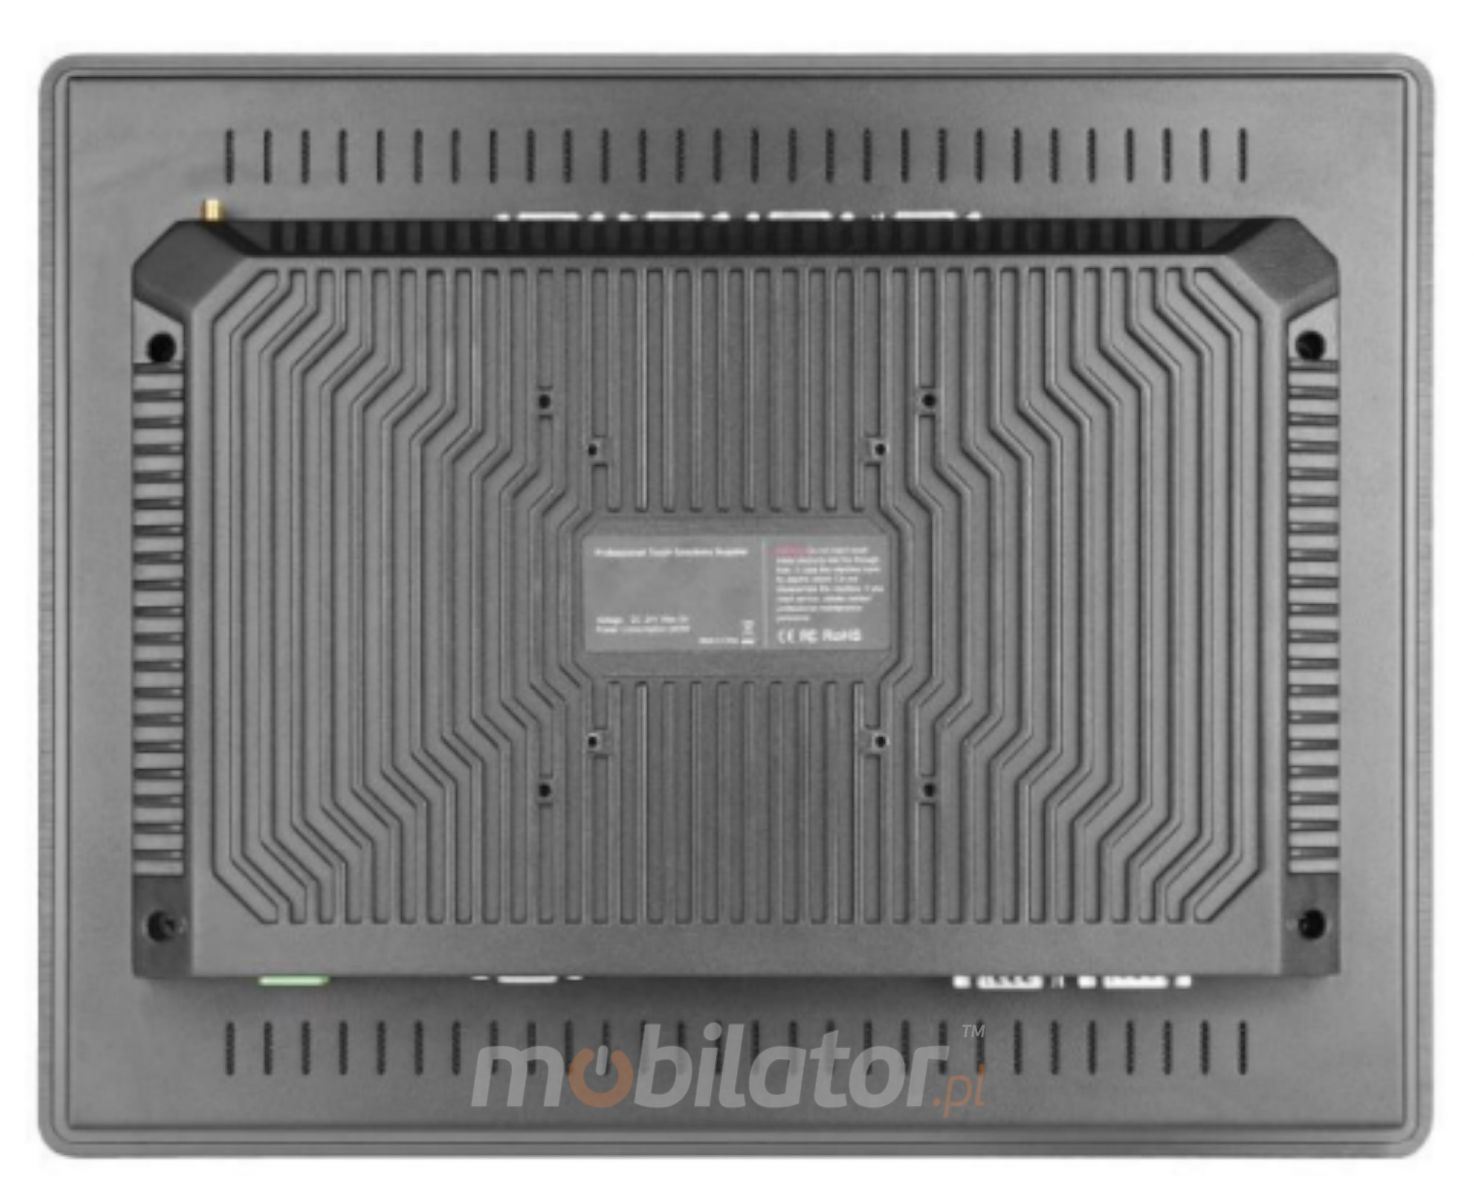 BIBOX-190PC2 durable and good quality panel computer in metal housing